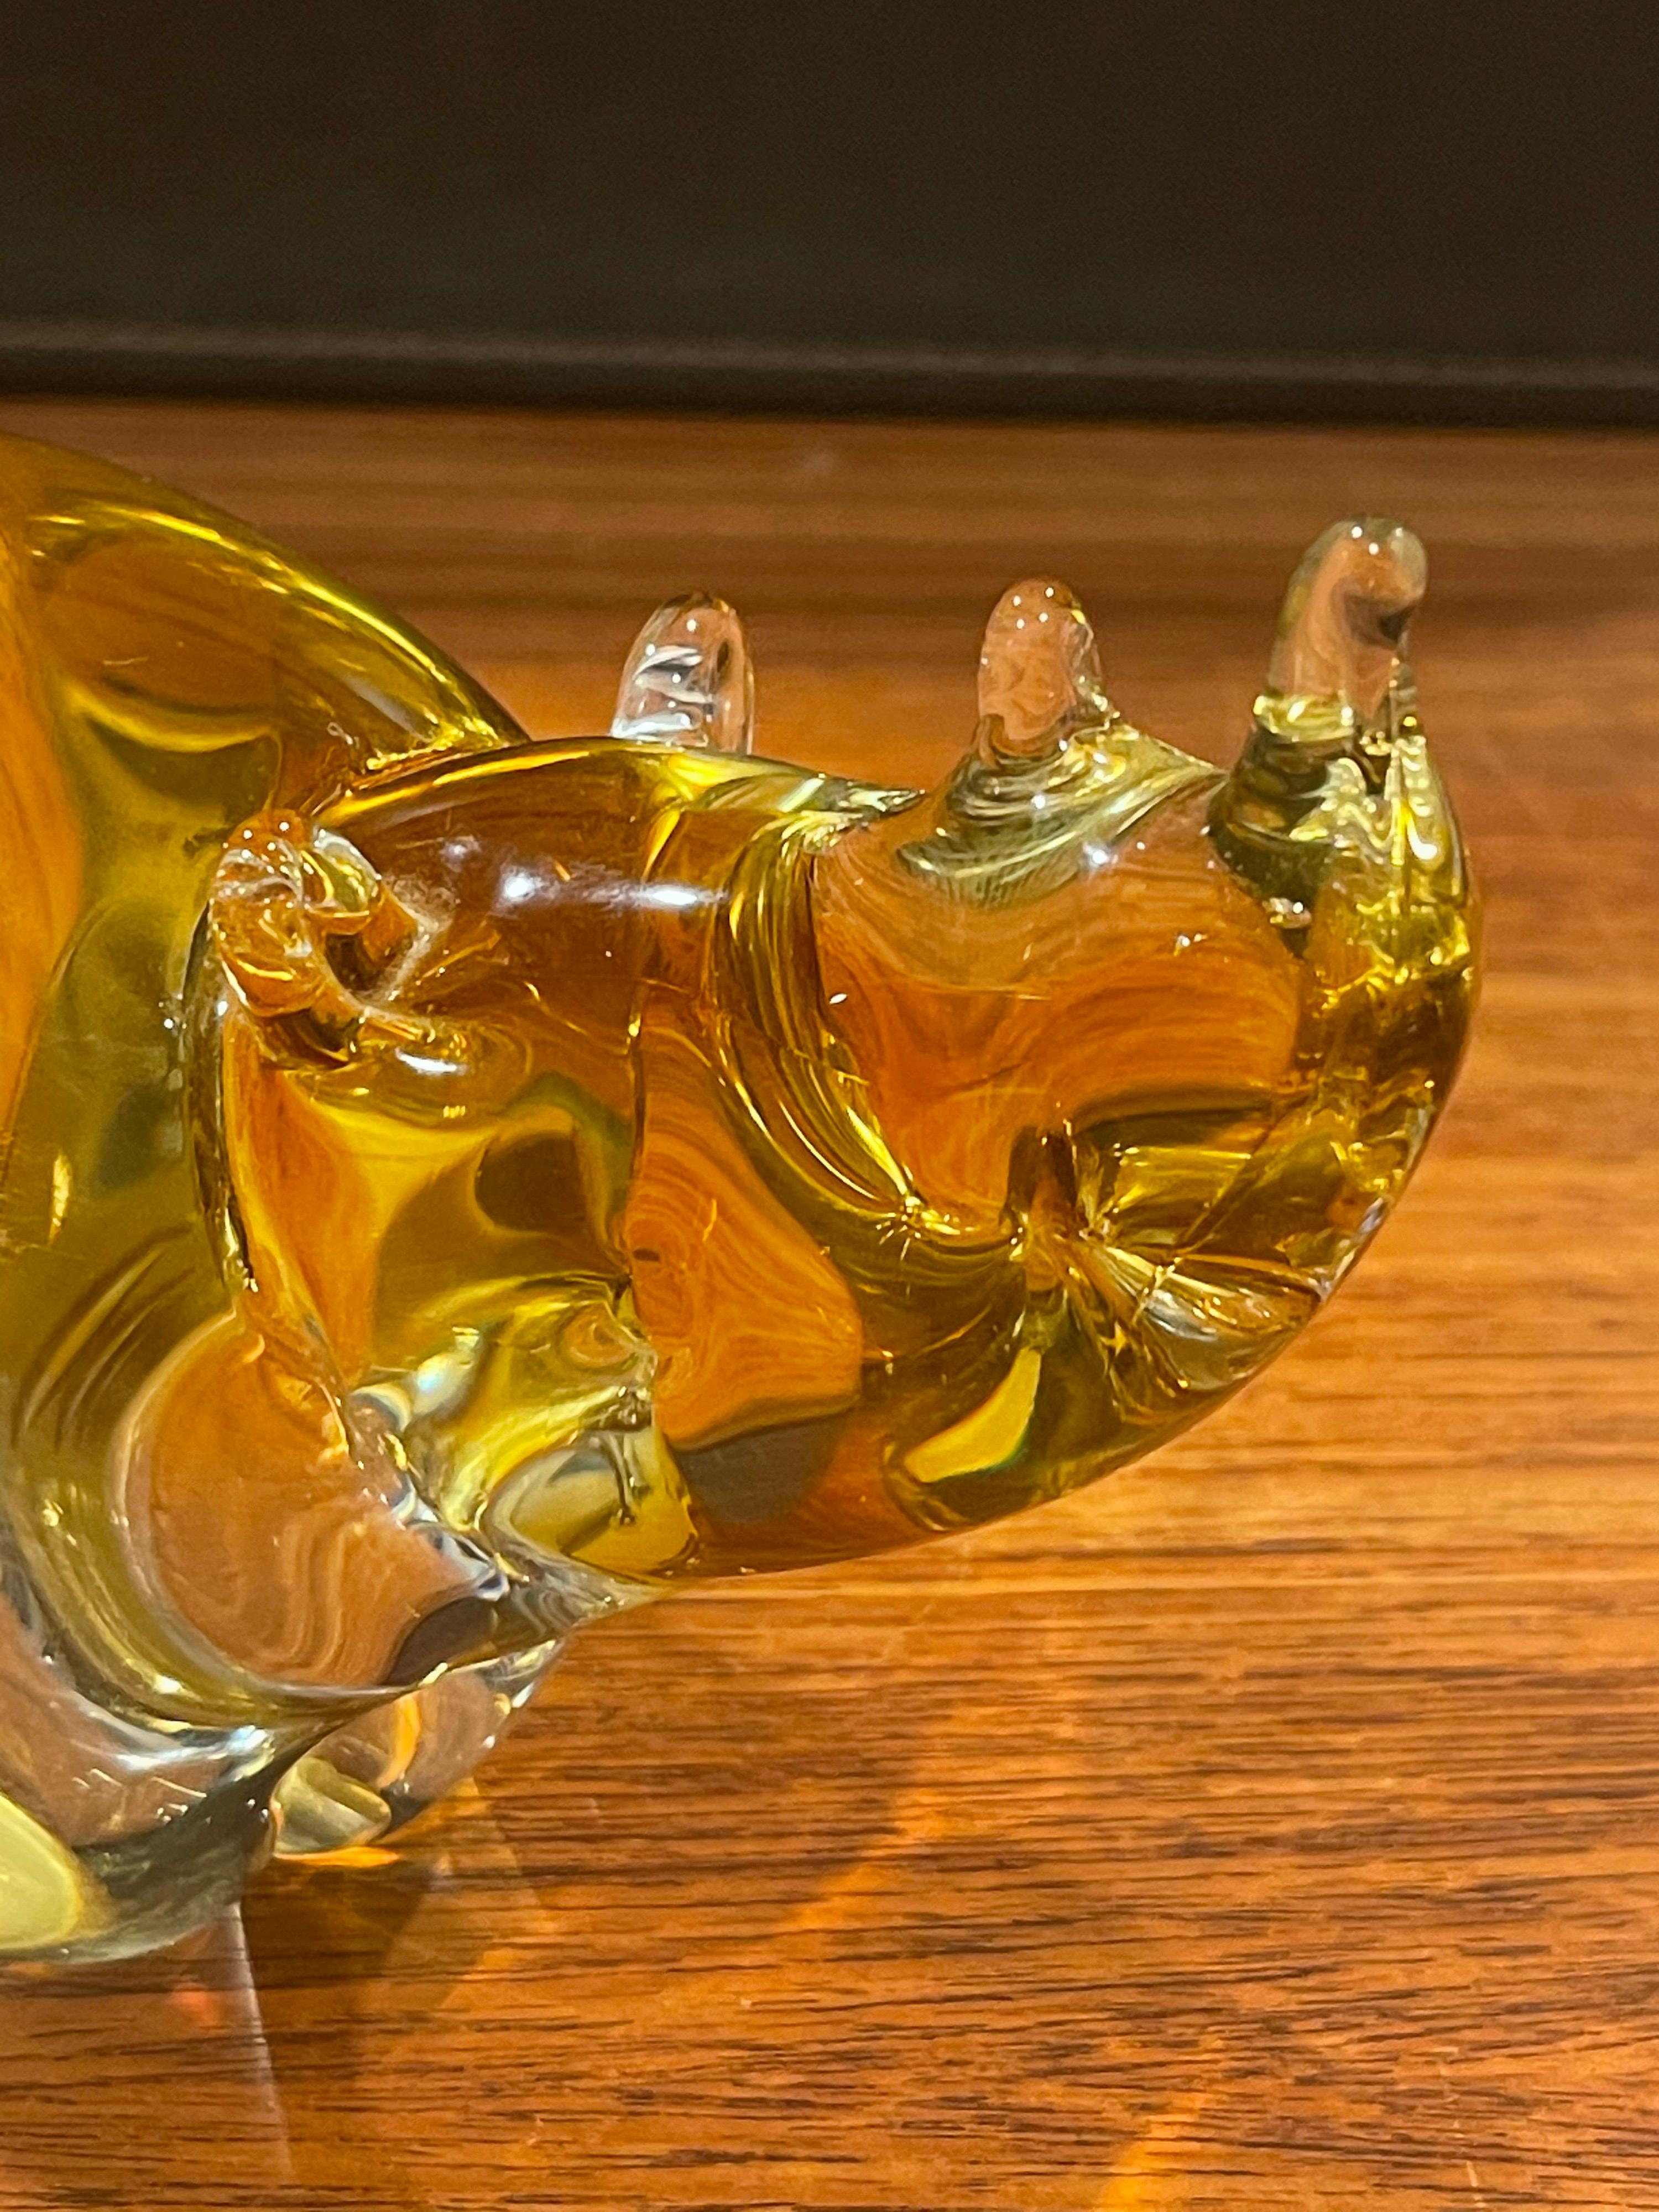 Art Glass Rhino / Rhinoceros Sculpture by Murano In Good Condition For Sale In San Diego, CA